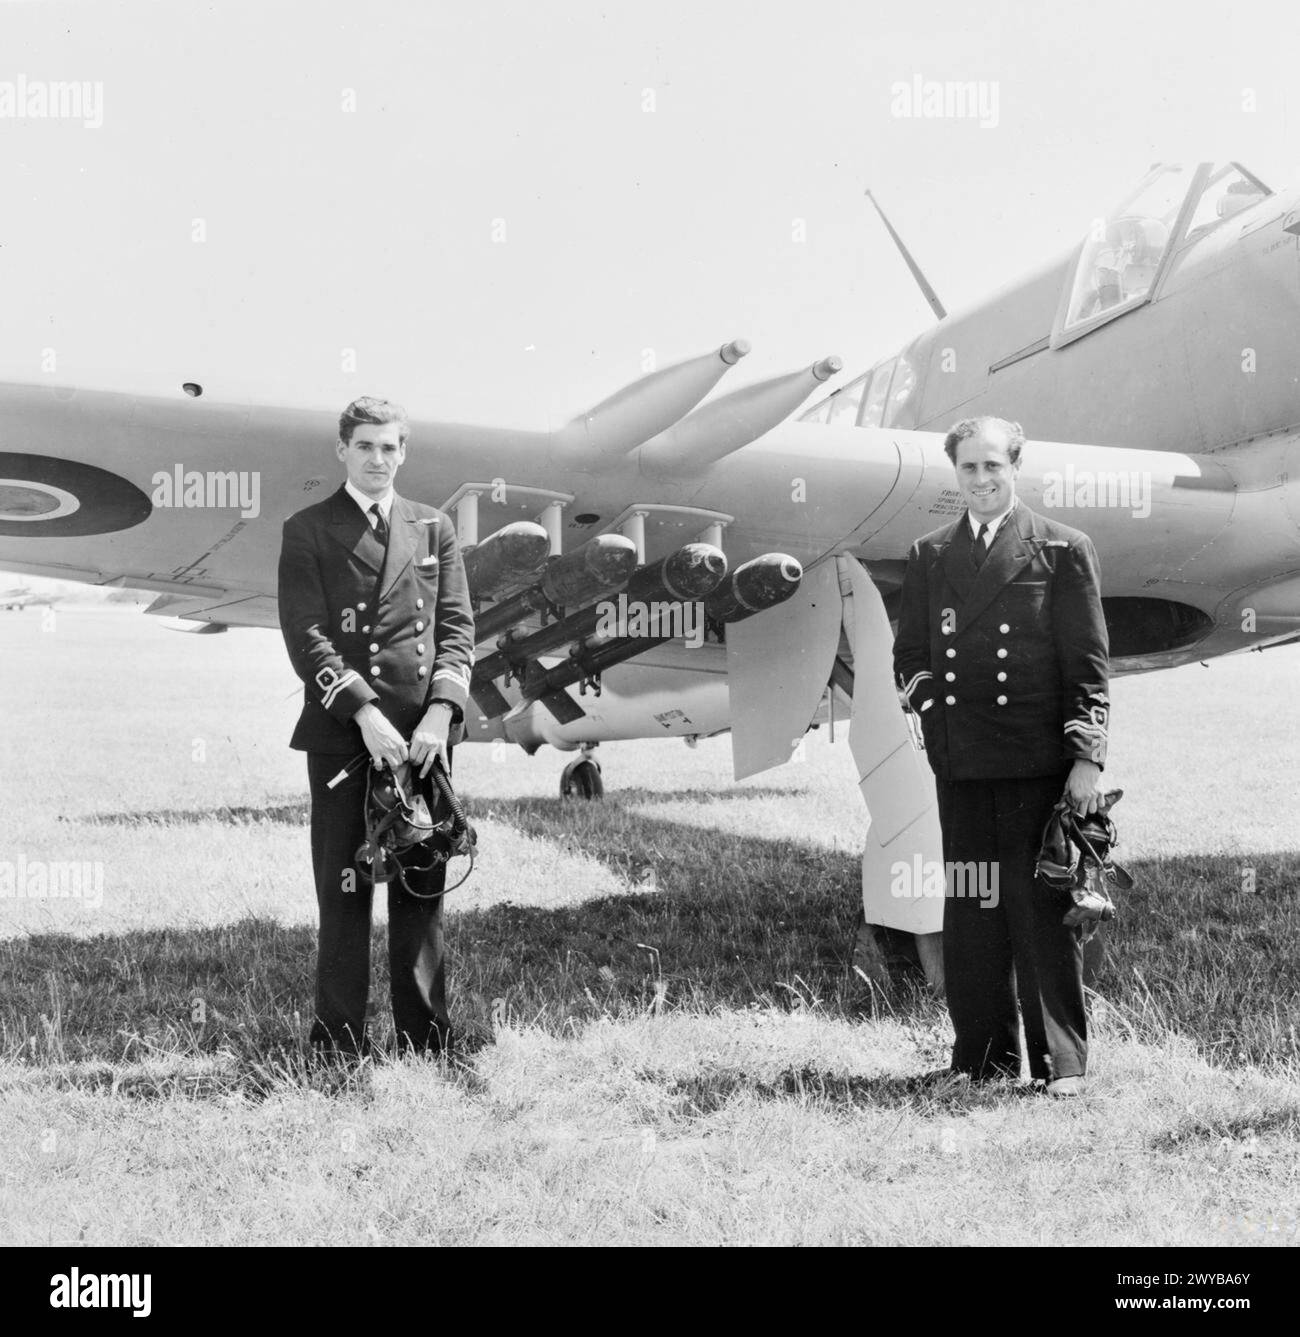 NAVAL FIGHTER ACES TO TOUR AMERICA. JUNE 1945, BEFORE-DEPARTURE PICTURES OF THE NAVAL PILOT, NAVIGATOR AND GROUND CREW OF THE FAIREY FIREFLY TWO-SEATER RECONNAISSANCE PLANE WHICH THEY ARE TAKING TO THE USA FOR PURPOSES OF DEMONSTRATION AND INSTRUCTION. - Lieut R G Armitage, DFC, RNVR, navigator (left) and Lieut D R Owen Price, DFC, RNVR, the pilot, with the plane. , Stock Photo